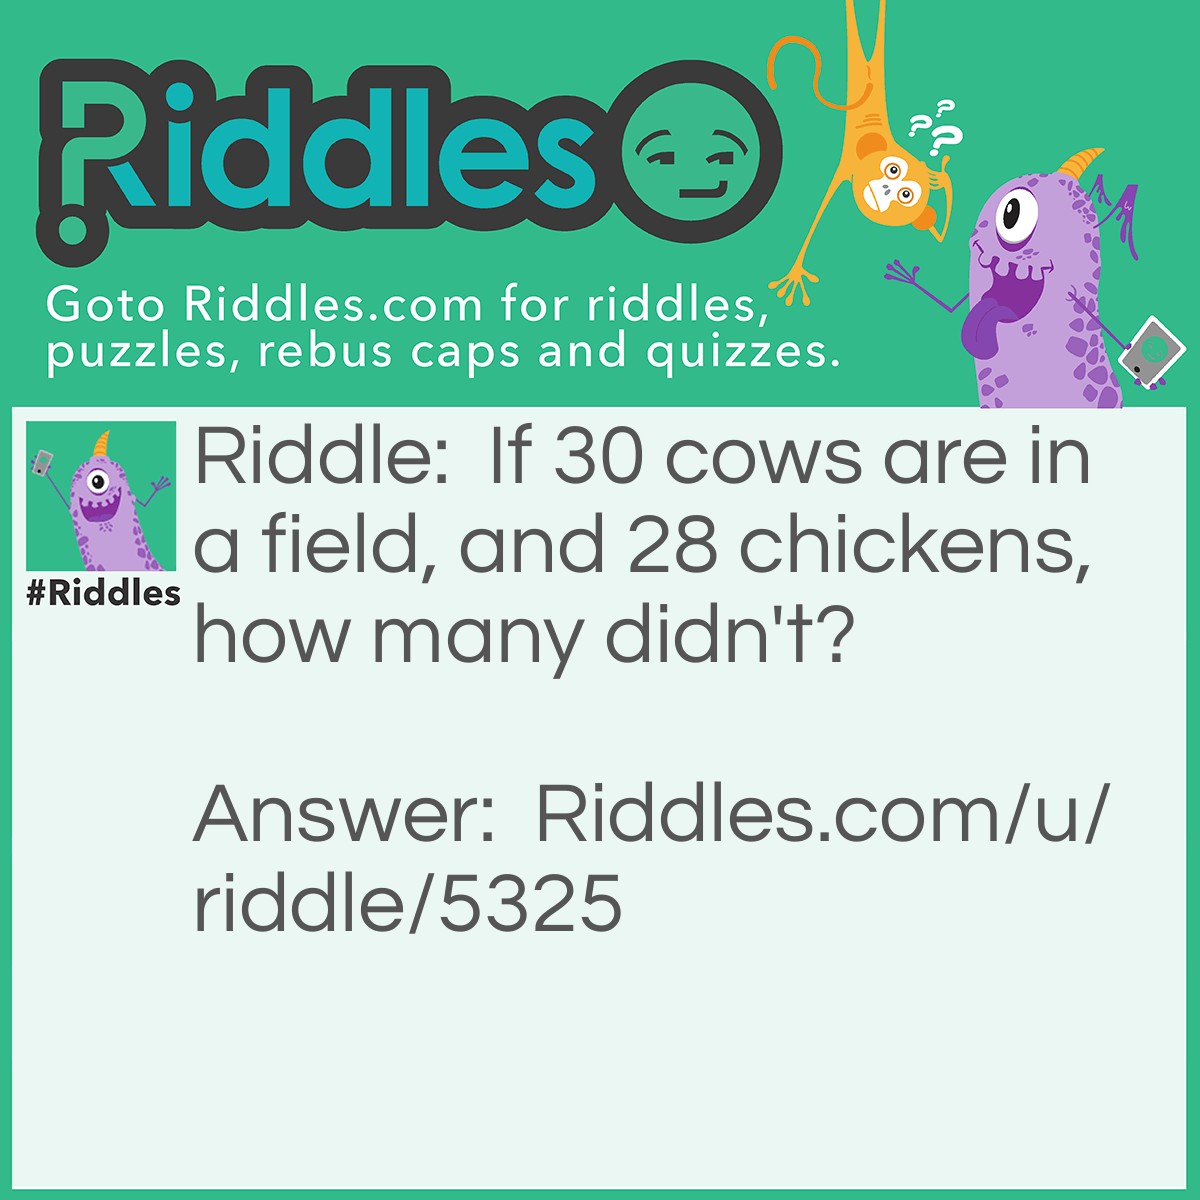 Riddle: If 30 cows are in a field, and 28 chickens, how many didn't? Answer: 10! Don't get it? Let me rephrase the sentence, if 30 cows are in a field, and 20 ATE chickens, how many didn't? Still don't get it? Just do 30 - 20. See? It =10!